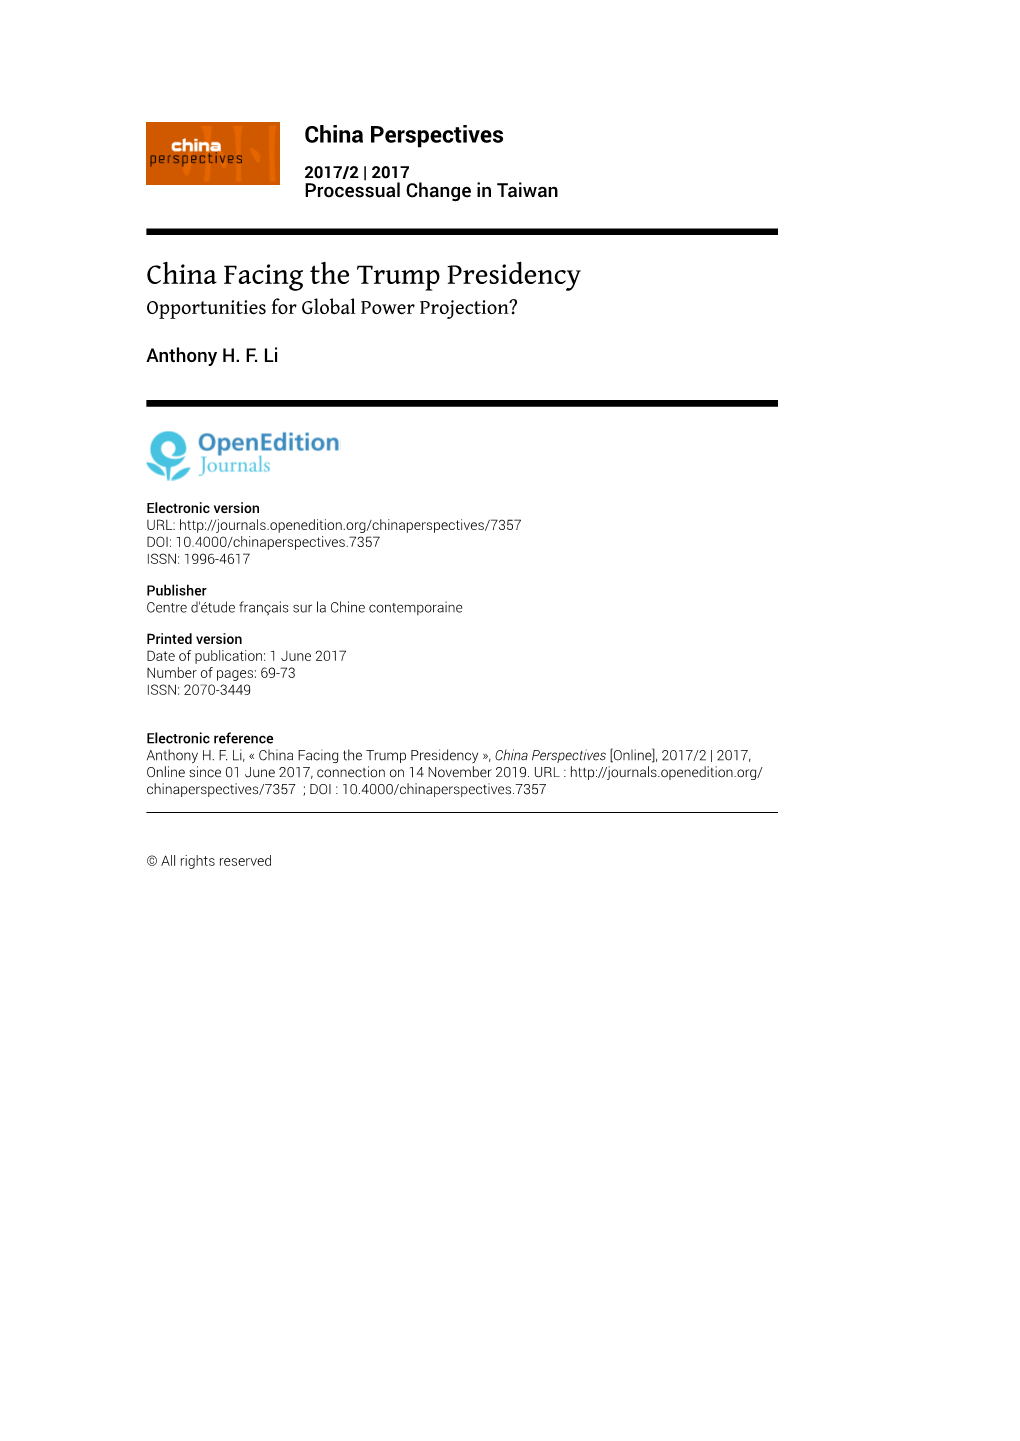 China Facing the Trump Presidency Opportunities for Global Power Projection?